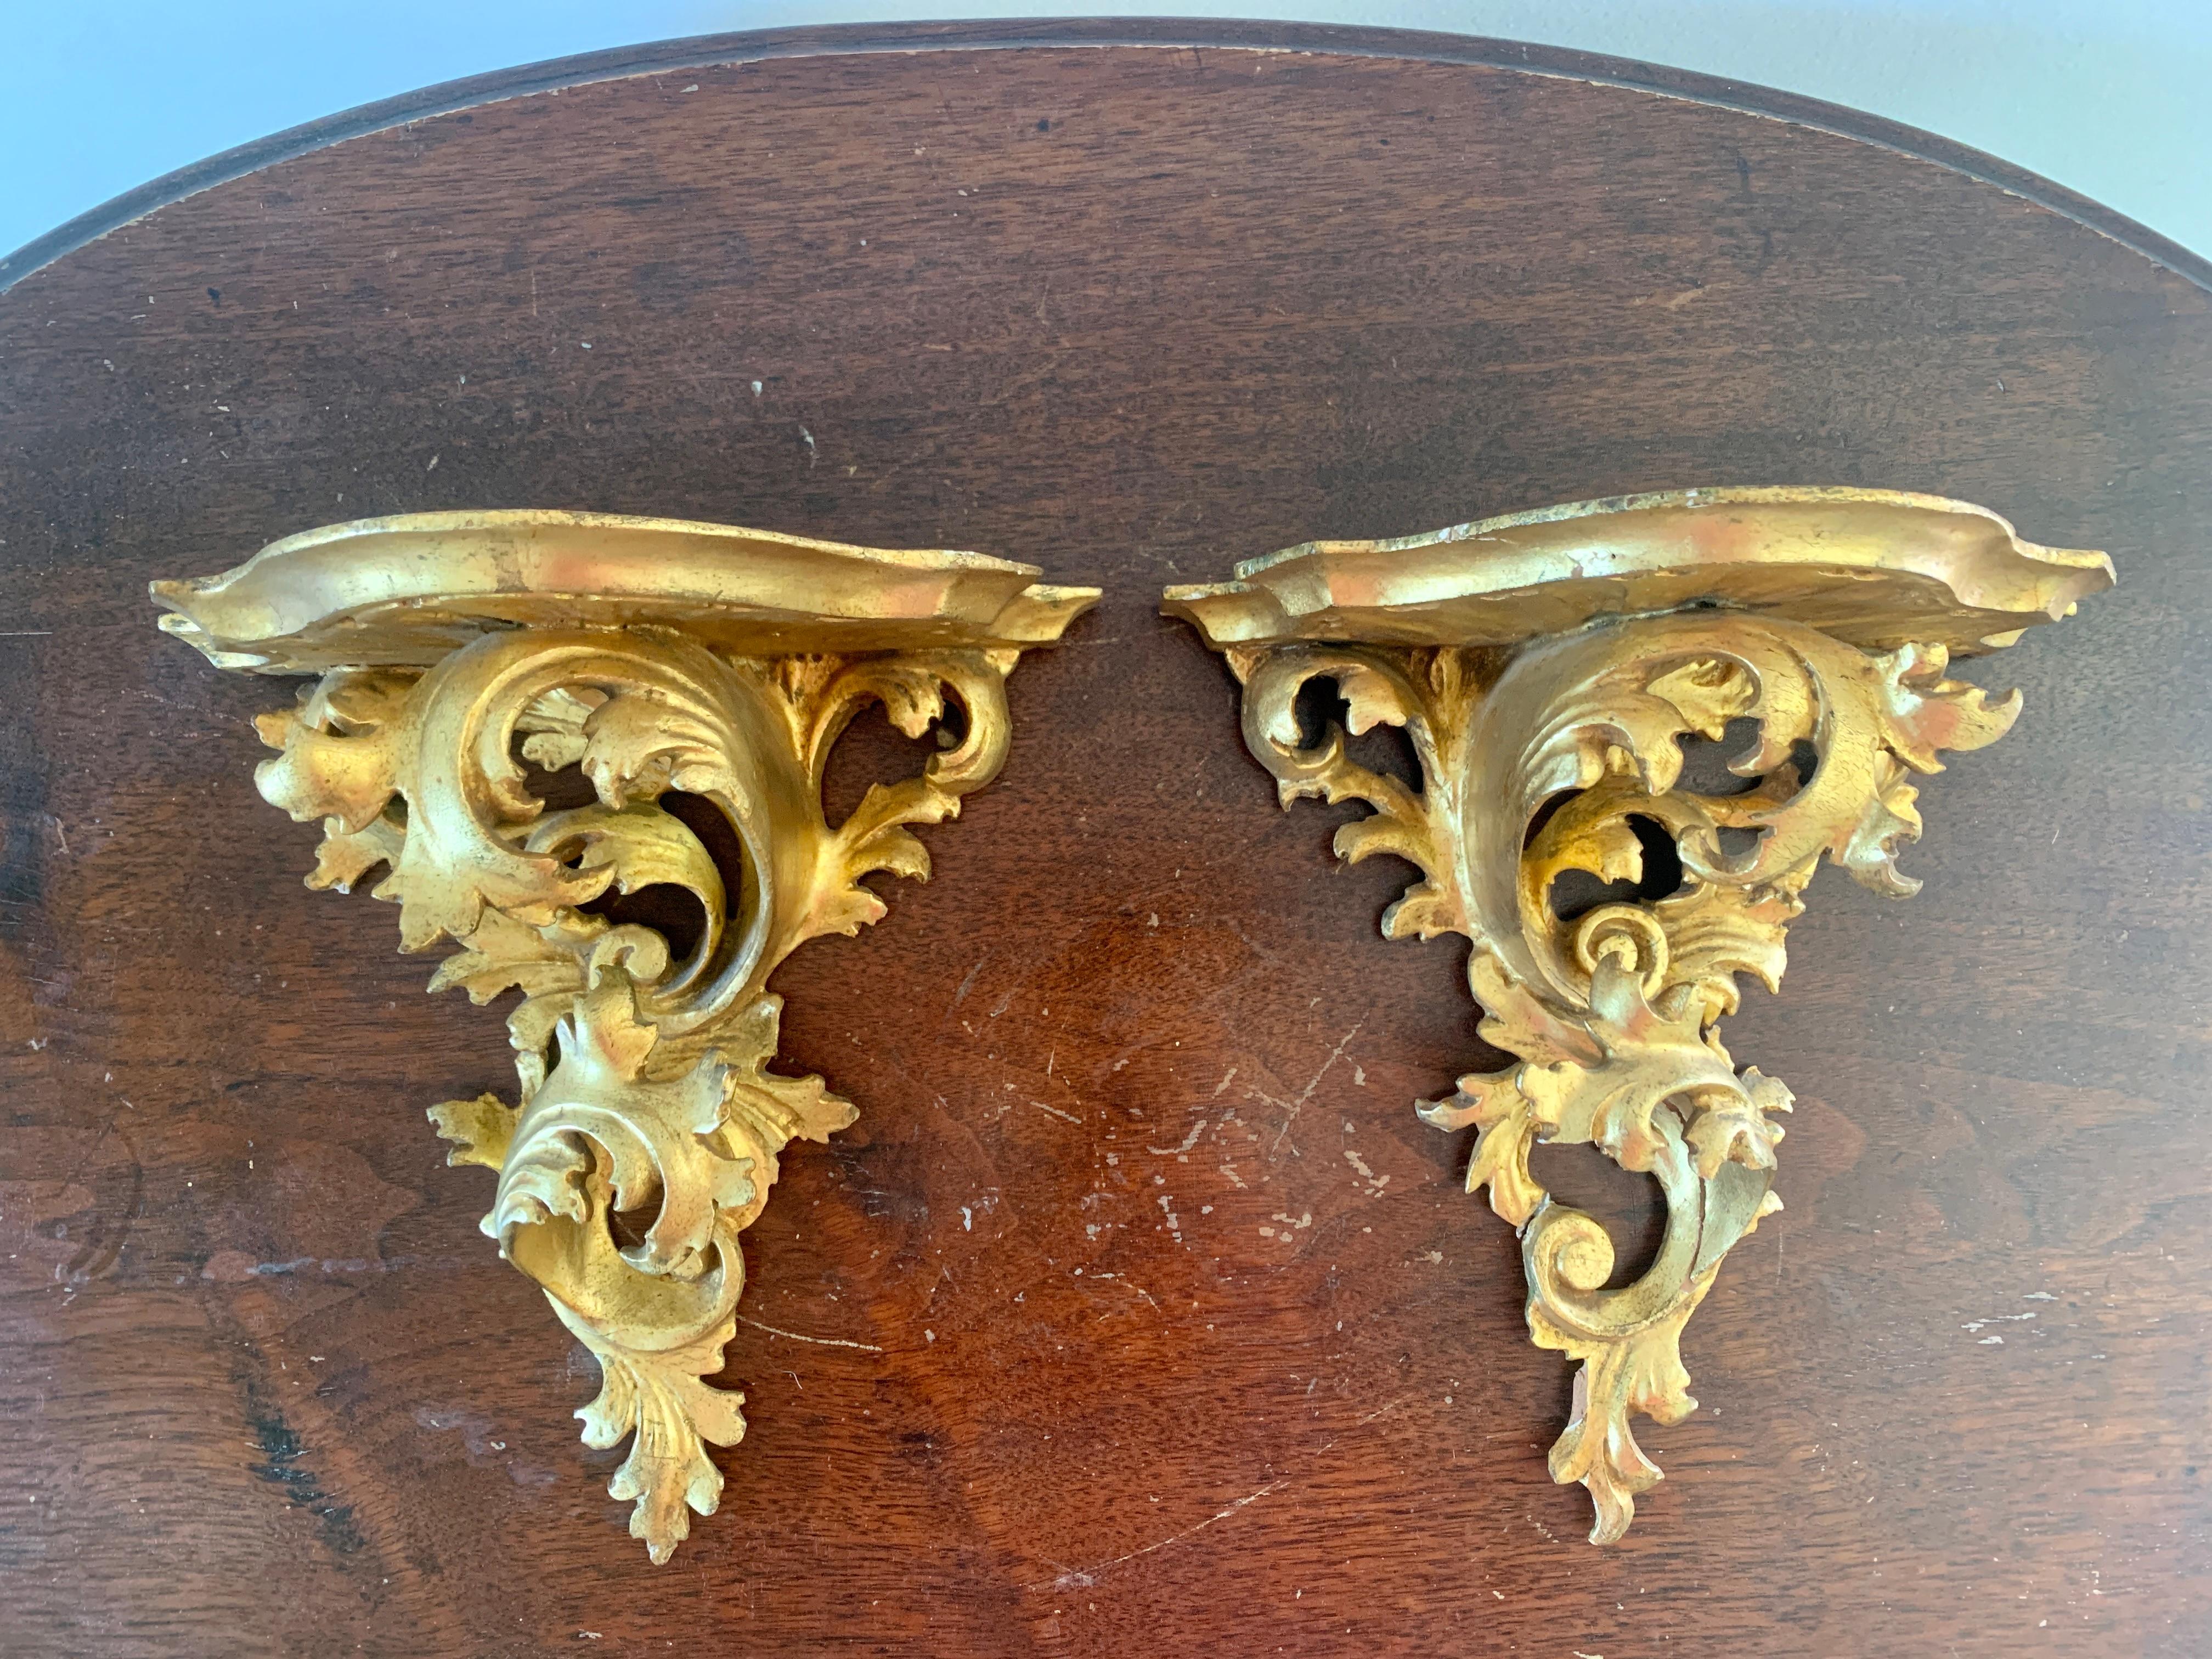 A gorgeous pair of Neoclassical or Rococo style giltwood wall sconces or brackets

Italy, circa Mid-20th century

Measures: 8.75